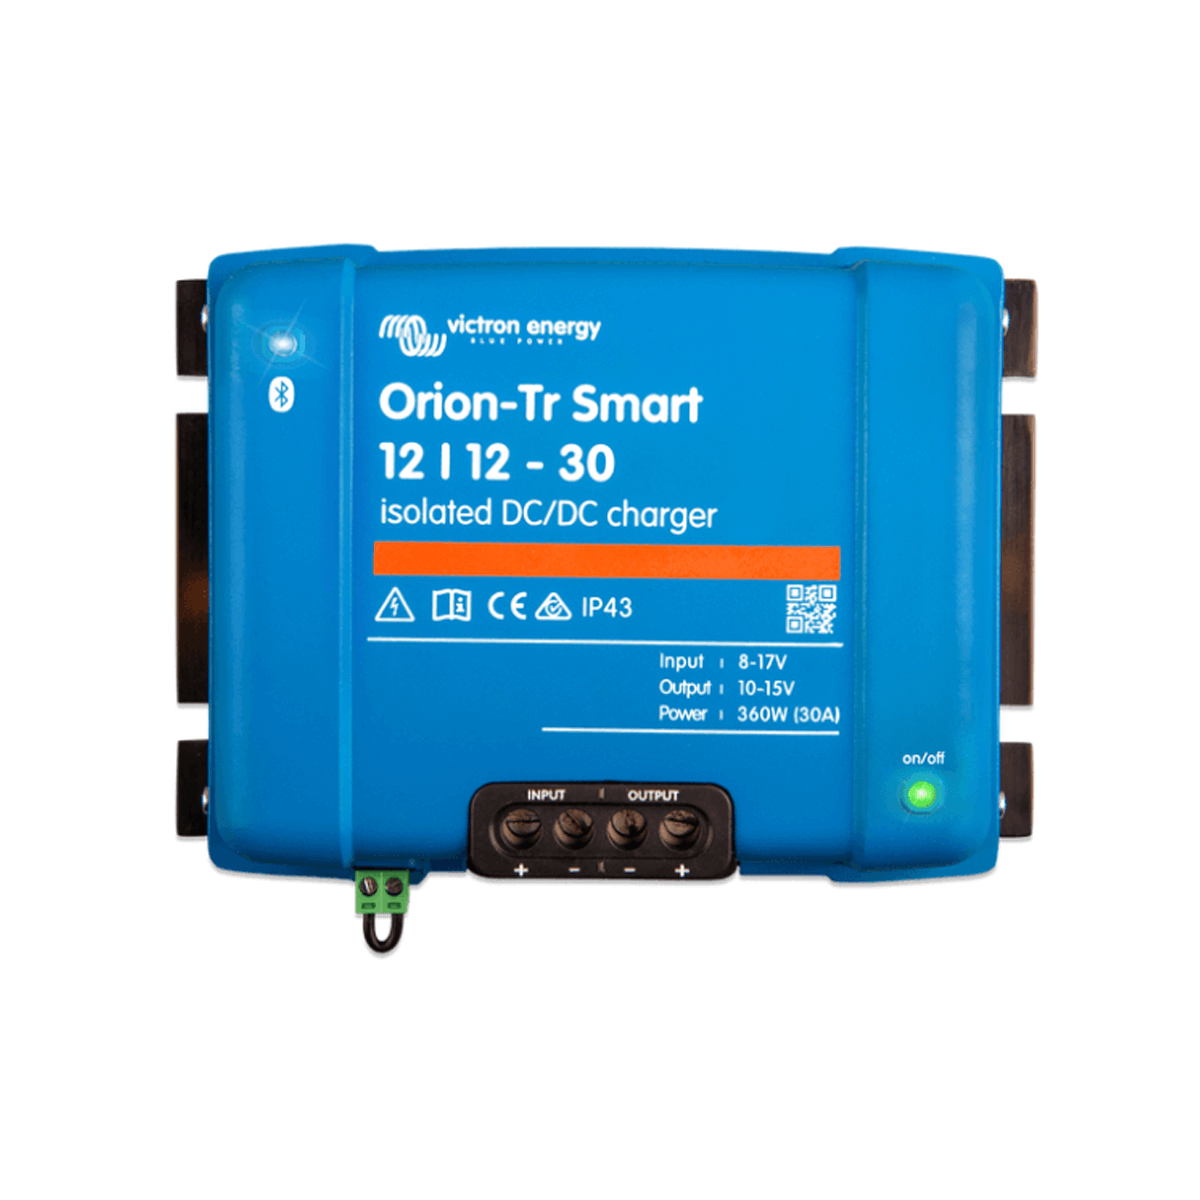 Blue Victron Energy Orion-Tr Smart DC-DC charger with input and output ports, green status light, and labels.